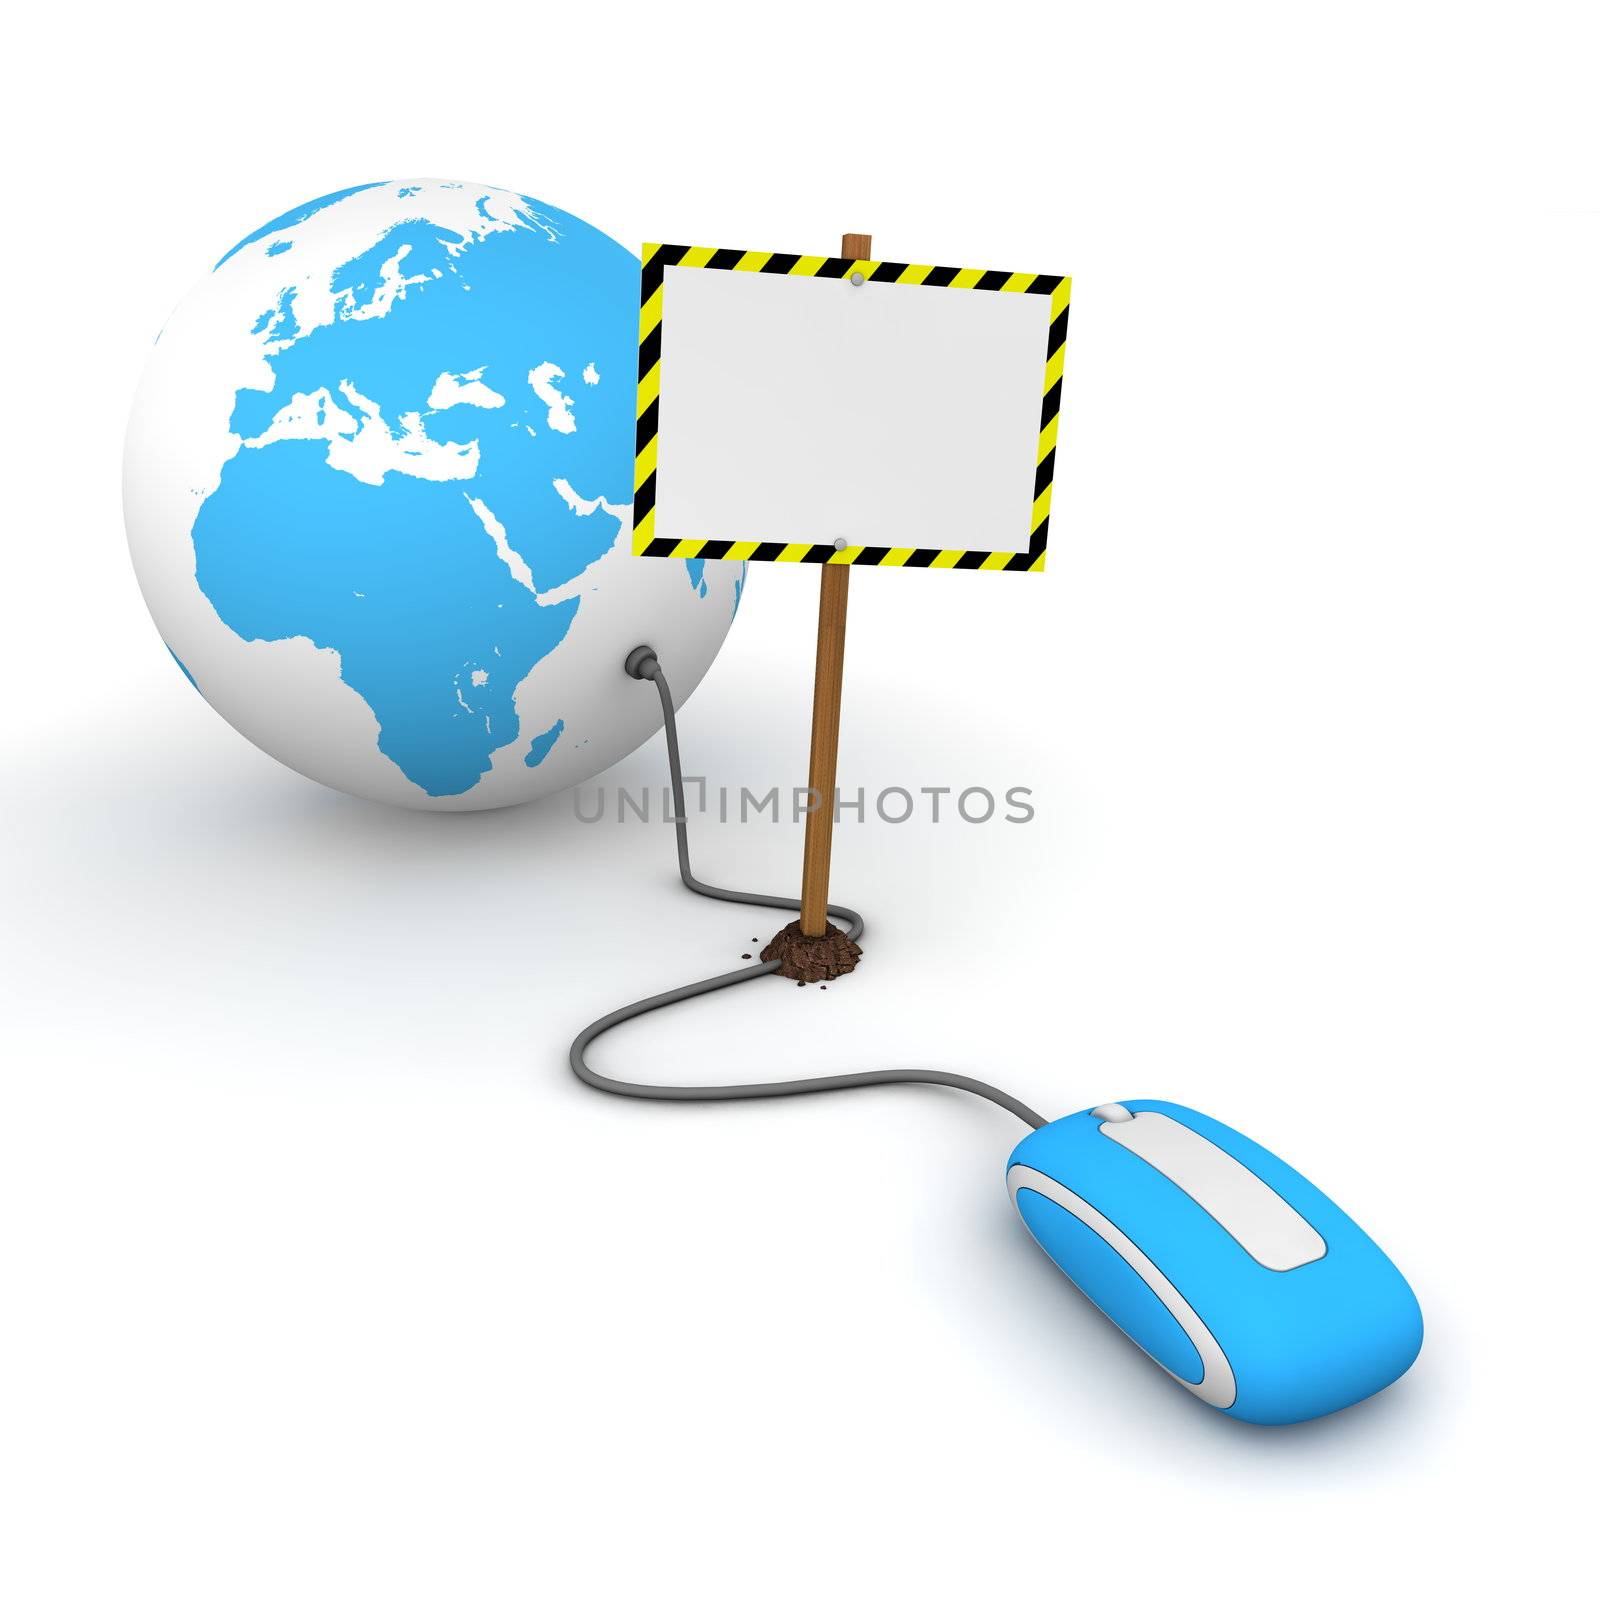 blue computer mouse is connected to a blue globe - surfing and browsing is blocked by a white rectangular sign that cuts the cable - empty template with yellow and black warning stripes